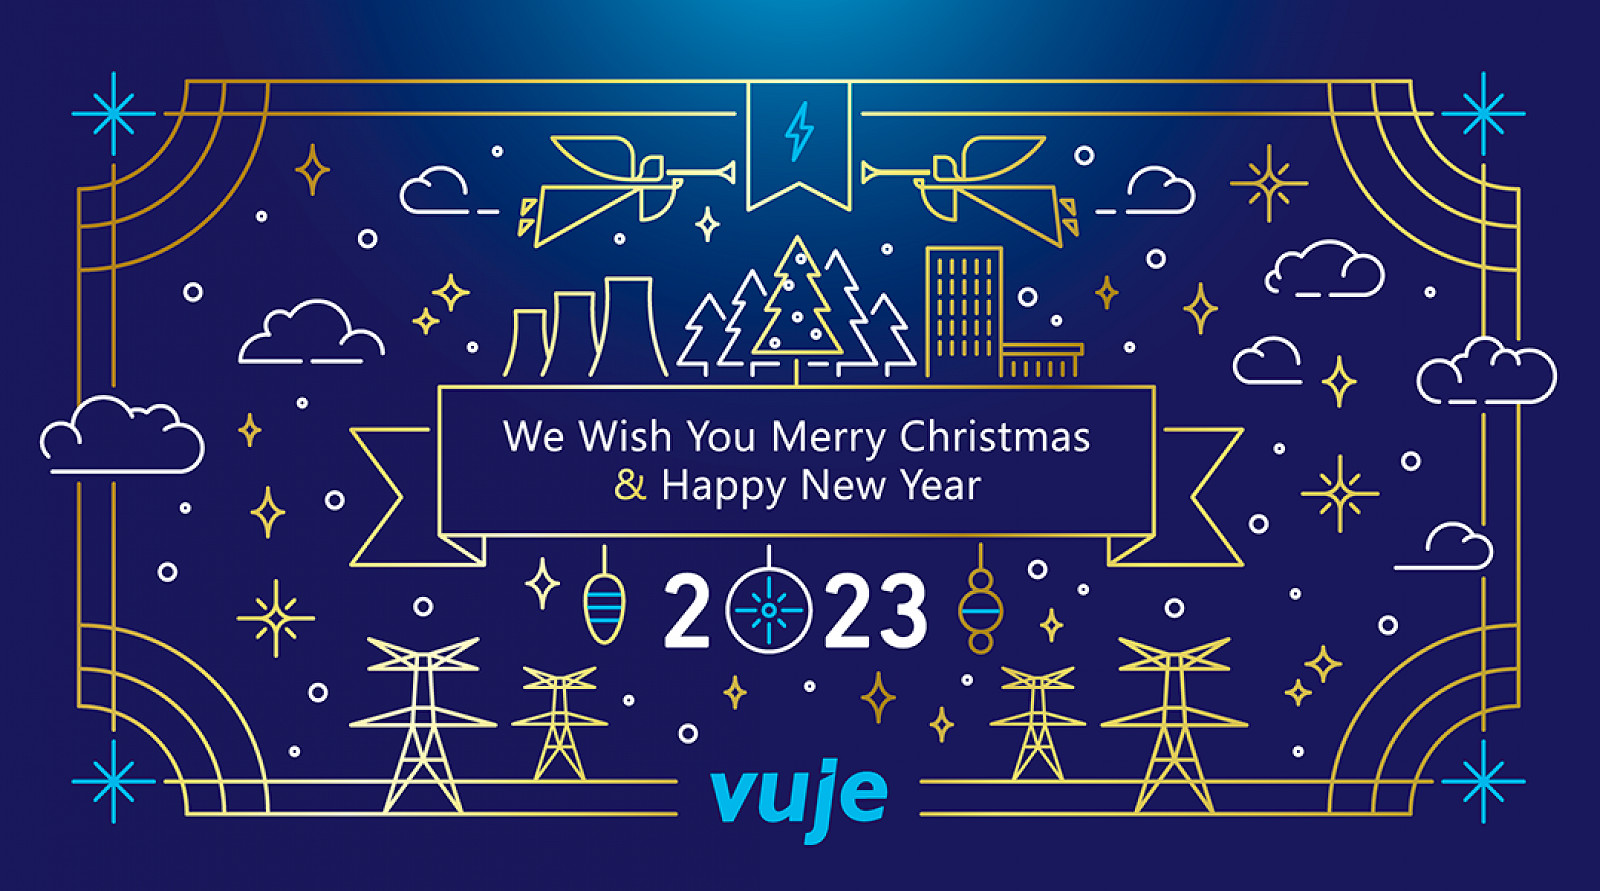 With gratitude for your support in 2022 we wish everyone a peaceful Christmas and successful New Year 2023